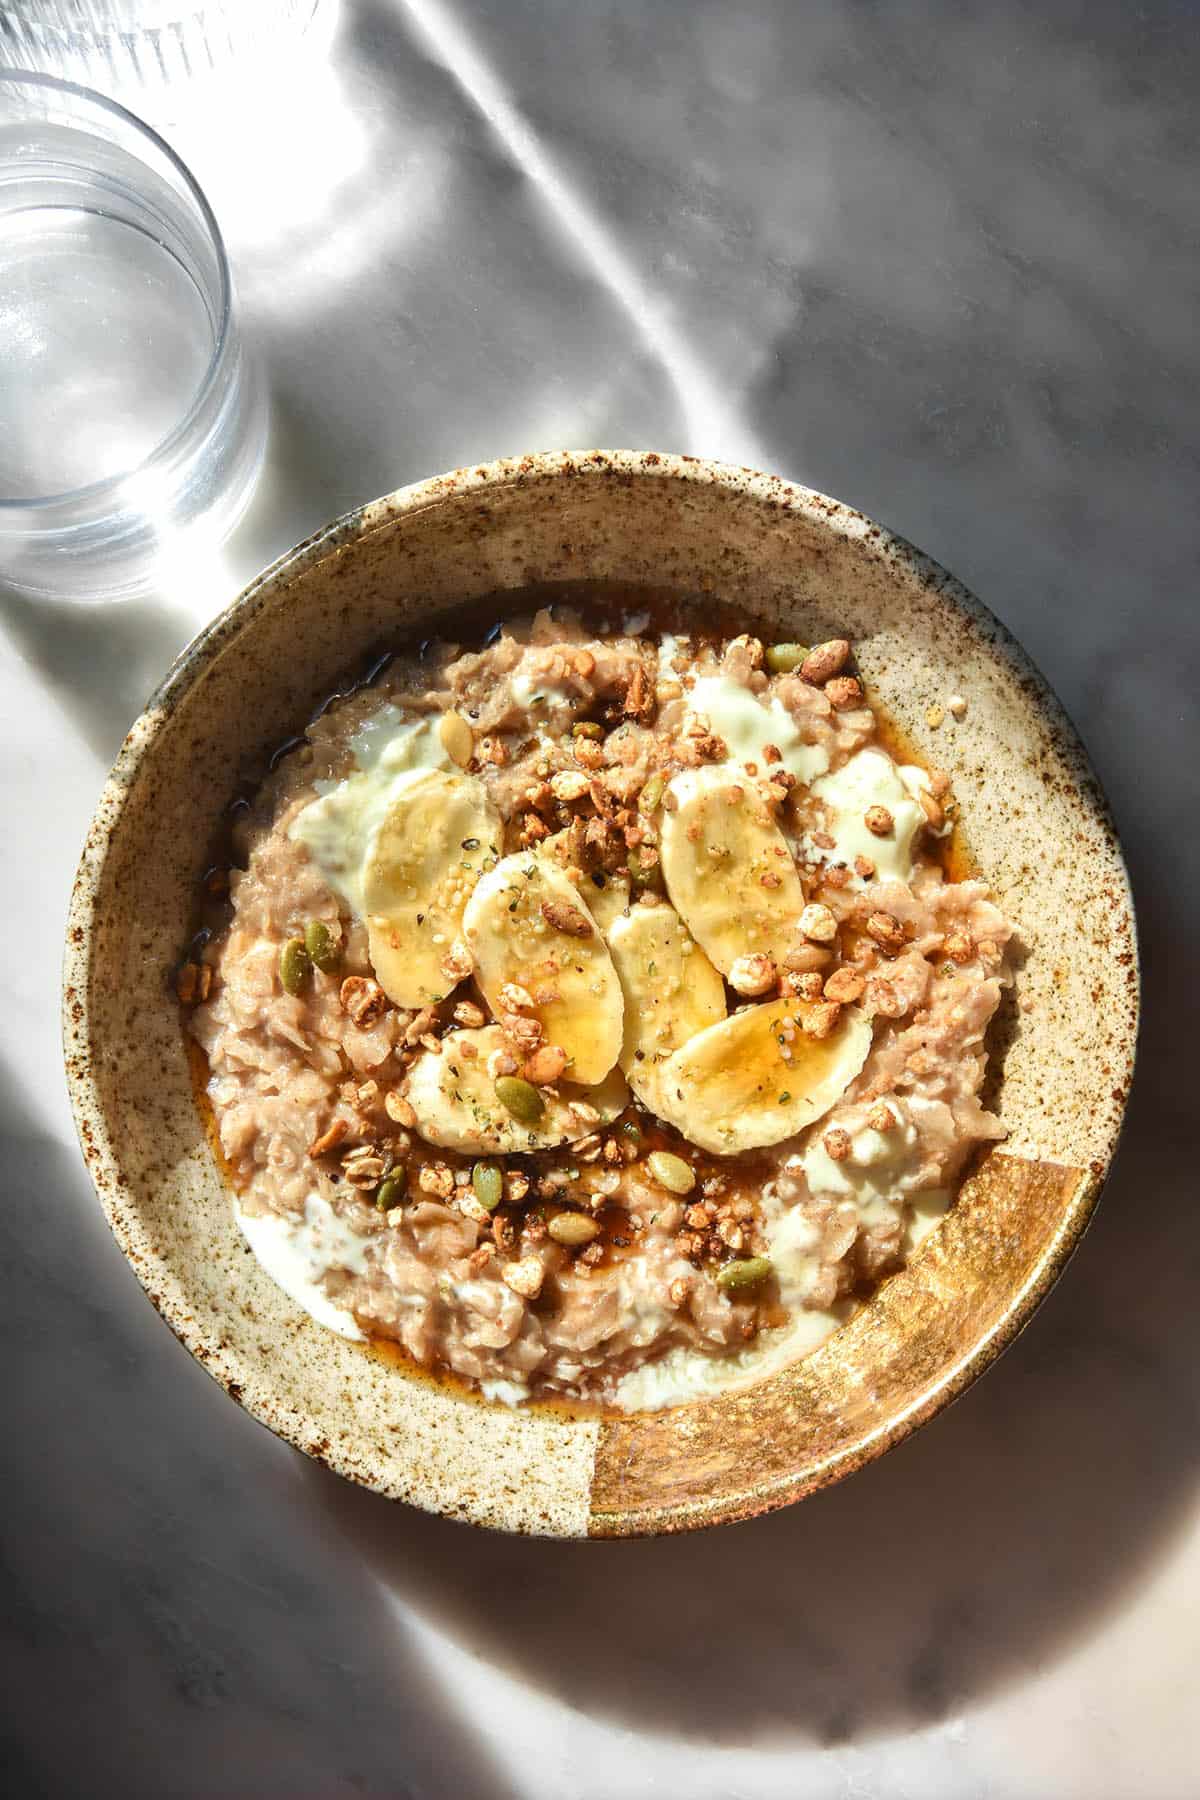 An aerial sunlit image of a bowl of gluten free overnight oats topped with bananas, granola and some yoghurt. The bowl sits in contrasting sunlight on a white marble table. Two glasses of water sit to the top left of the image and cast a shadow across the bowl.